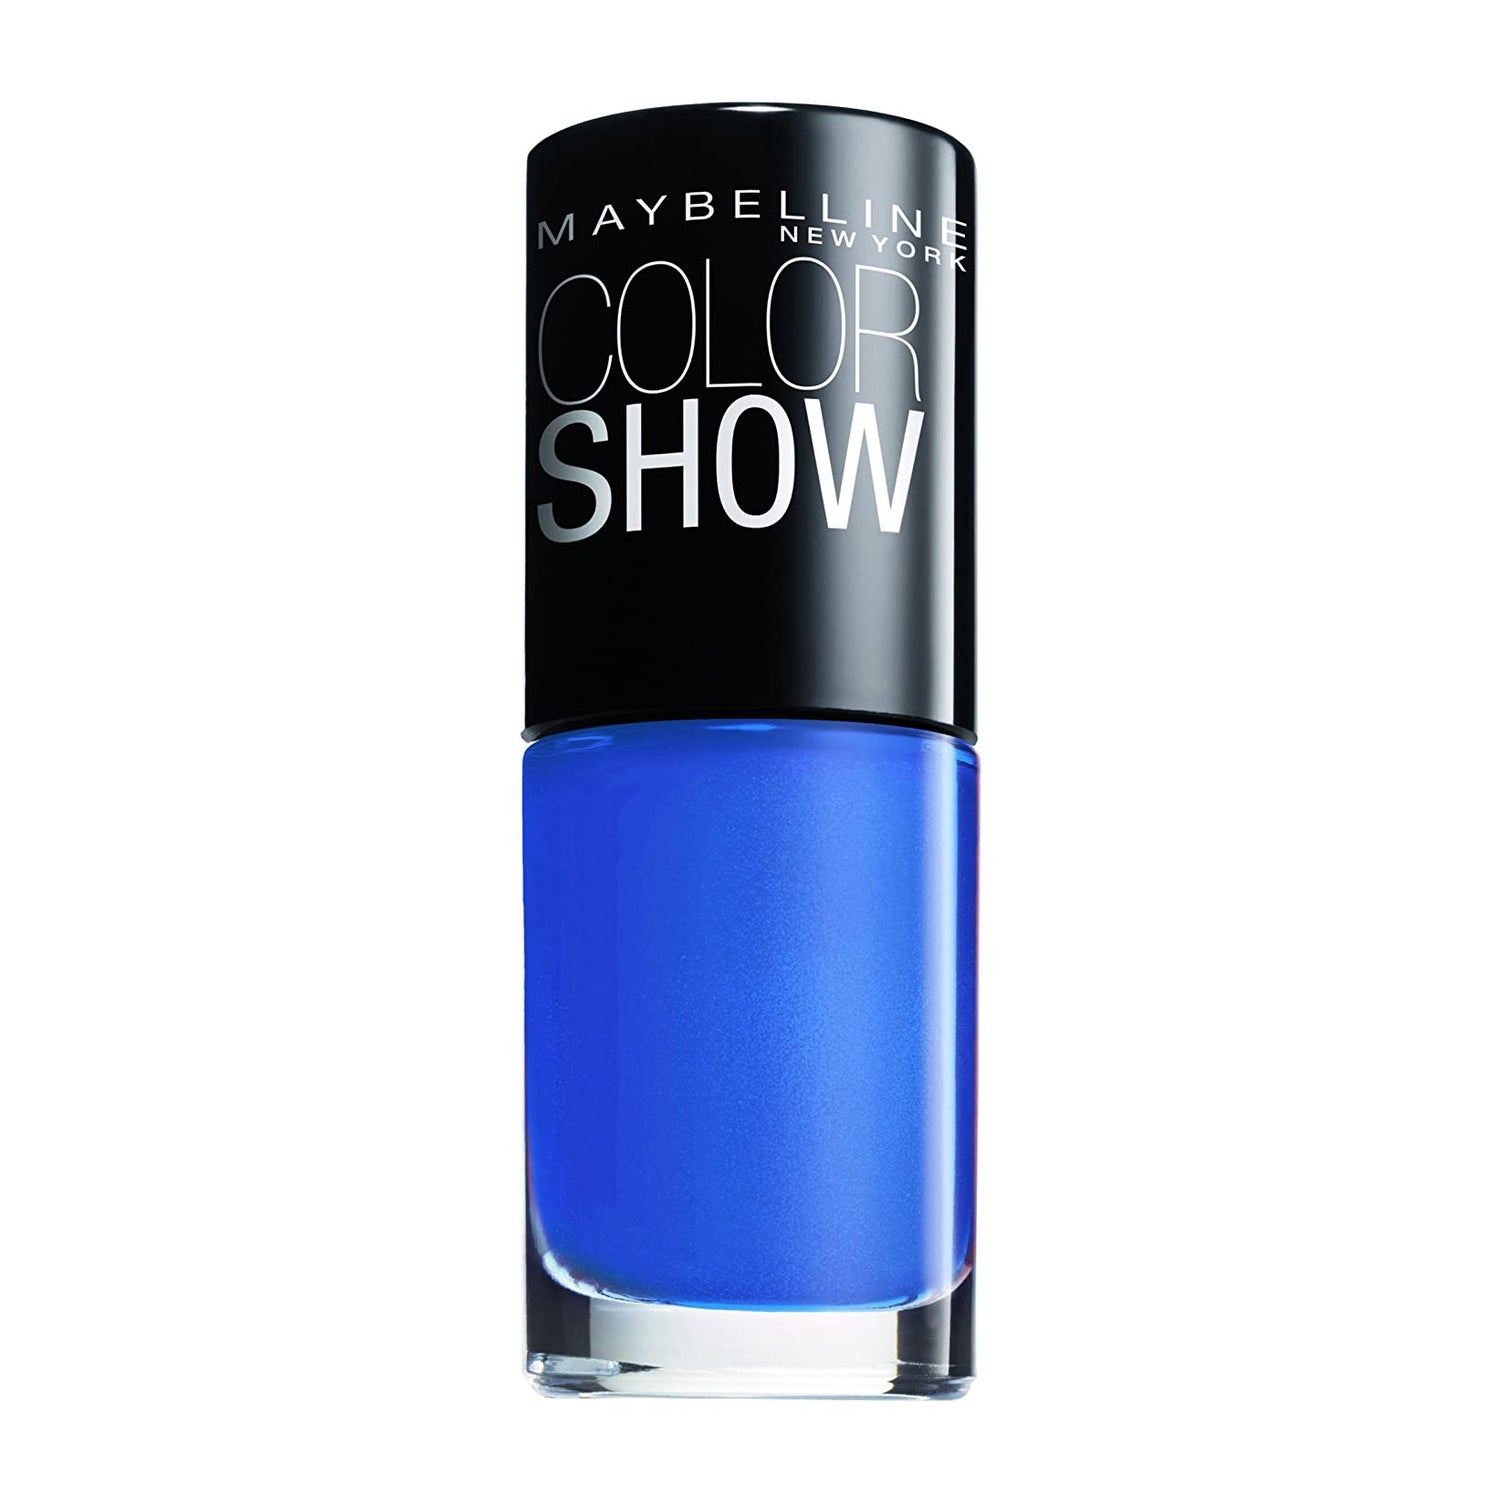 Maybelline Color Show Midnight Blue Nail Lacquer - Shop Nail Polish at H-E-B